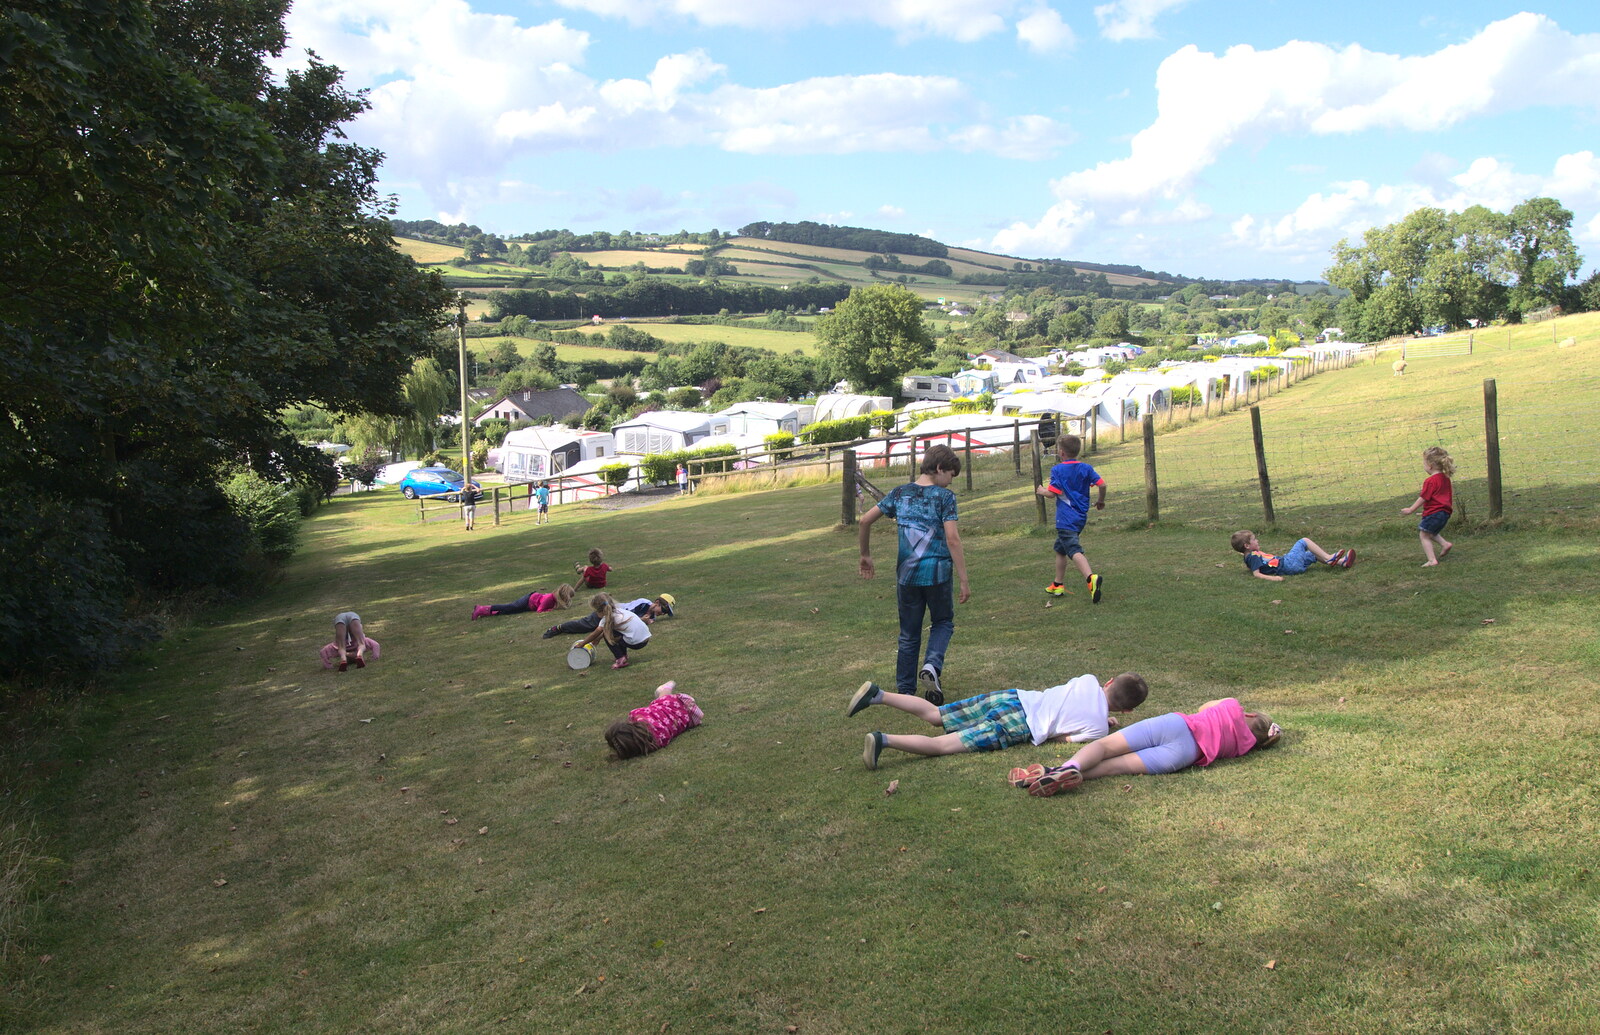 The children all roll down a hill from Camping With Sean, Ashburton, Devon - 8th August 2016